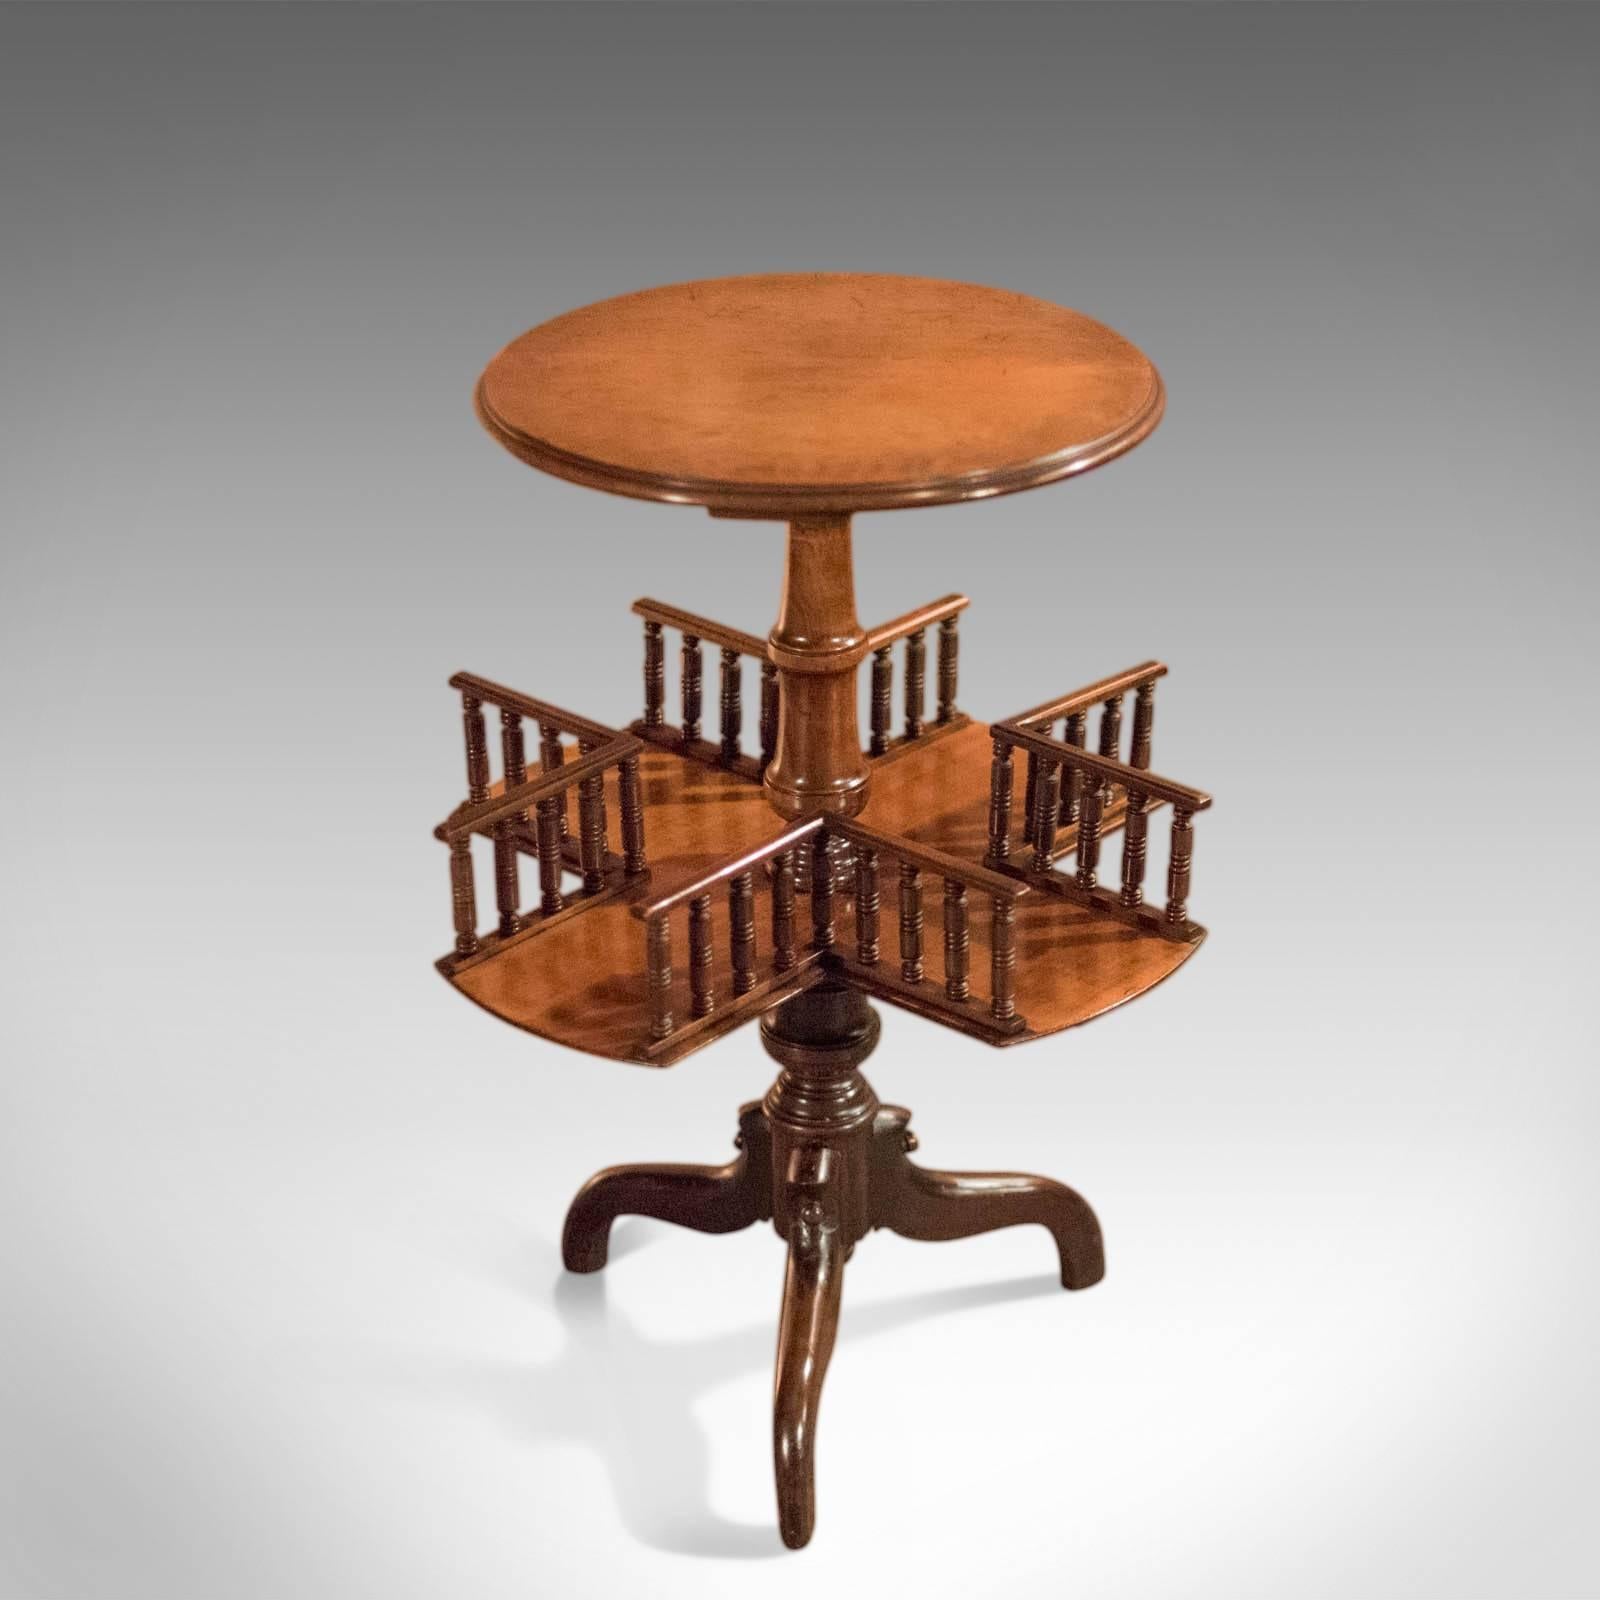 This is an antique, Victorian wine table with revolving bookshelf dating to circa 1850.

On a tripod of down-swept legs the table is raised on a stout, ring turned column. The legs with pegged detail and a hanging, central flat finial.

The